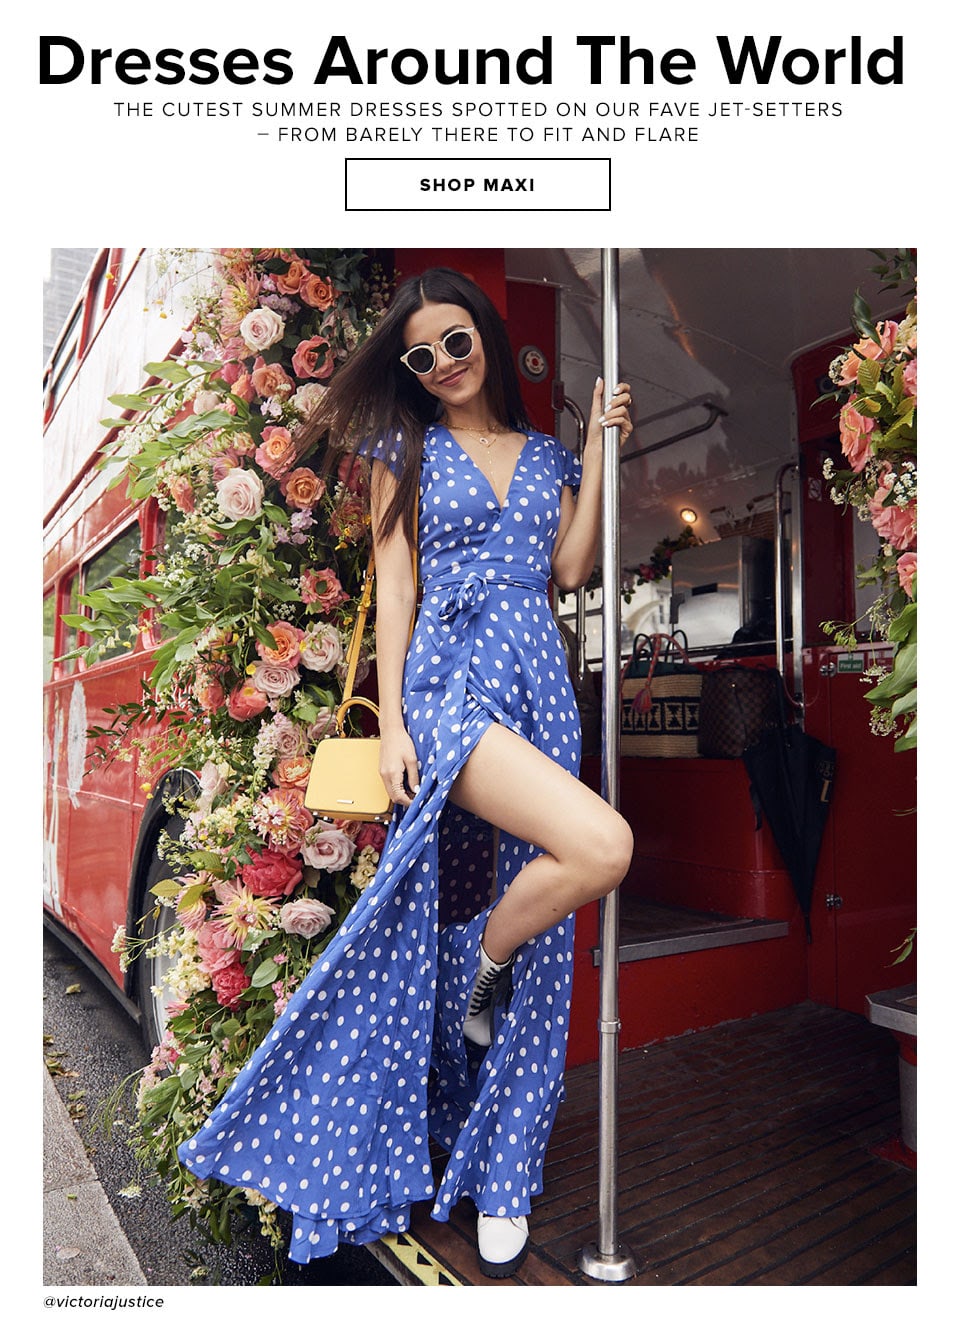 Dresses Around The World. The cutest summer dresses spotted on our fave jet-setters – from barely there to fit and flare. Shop Maxi.